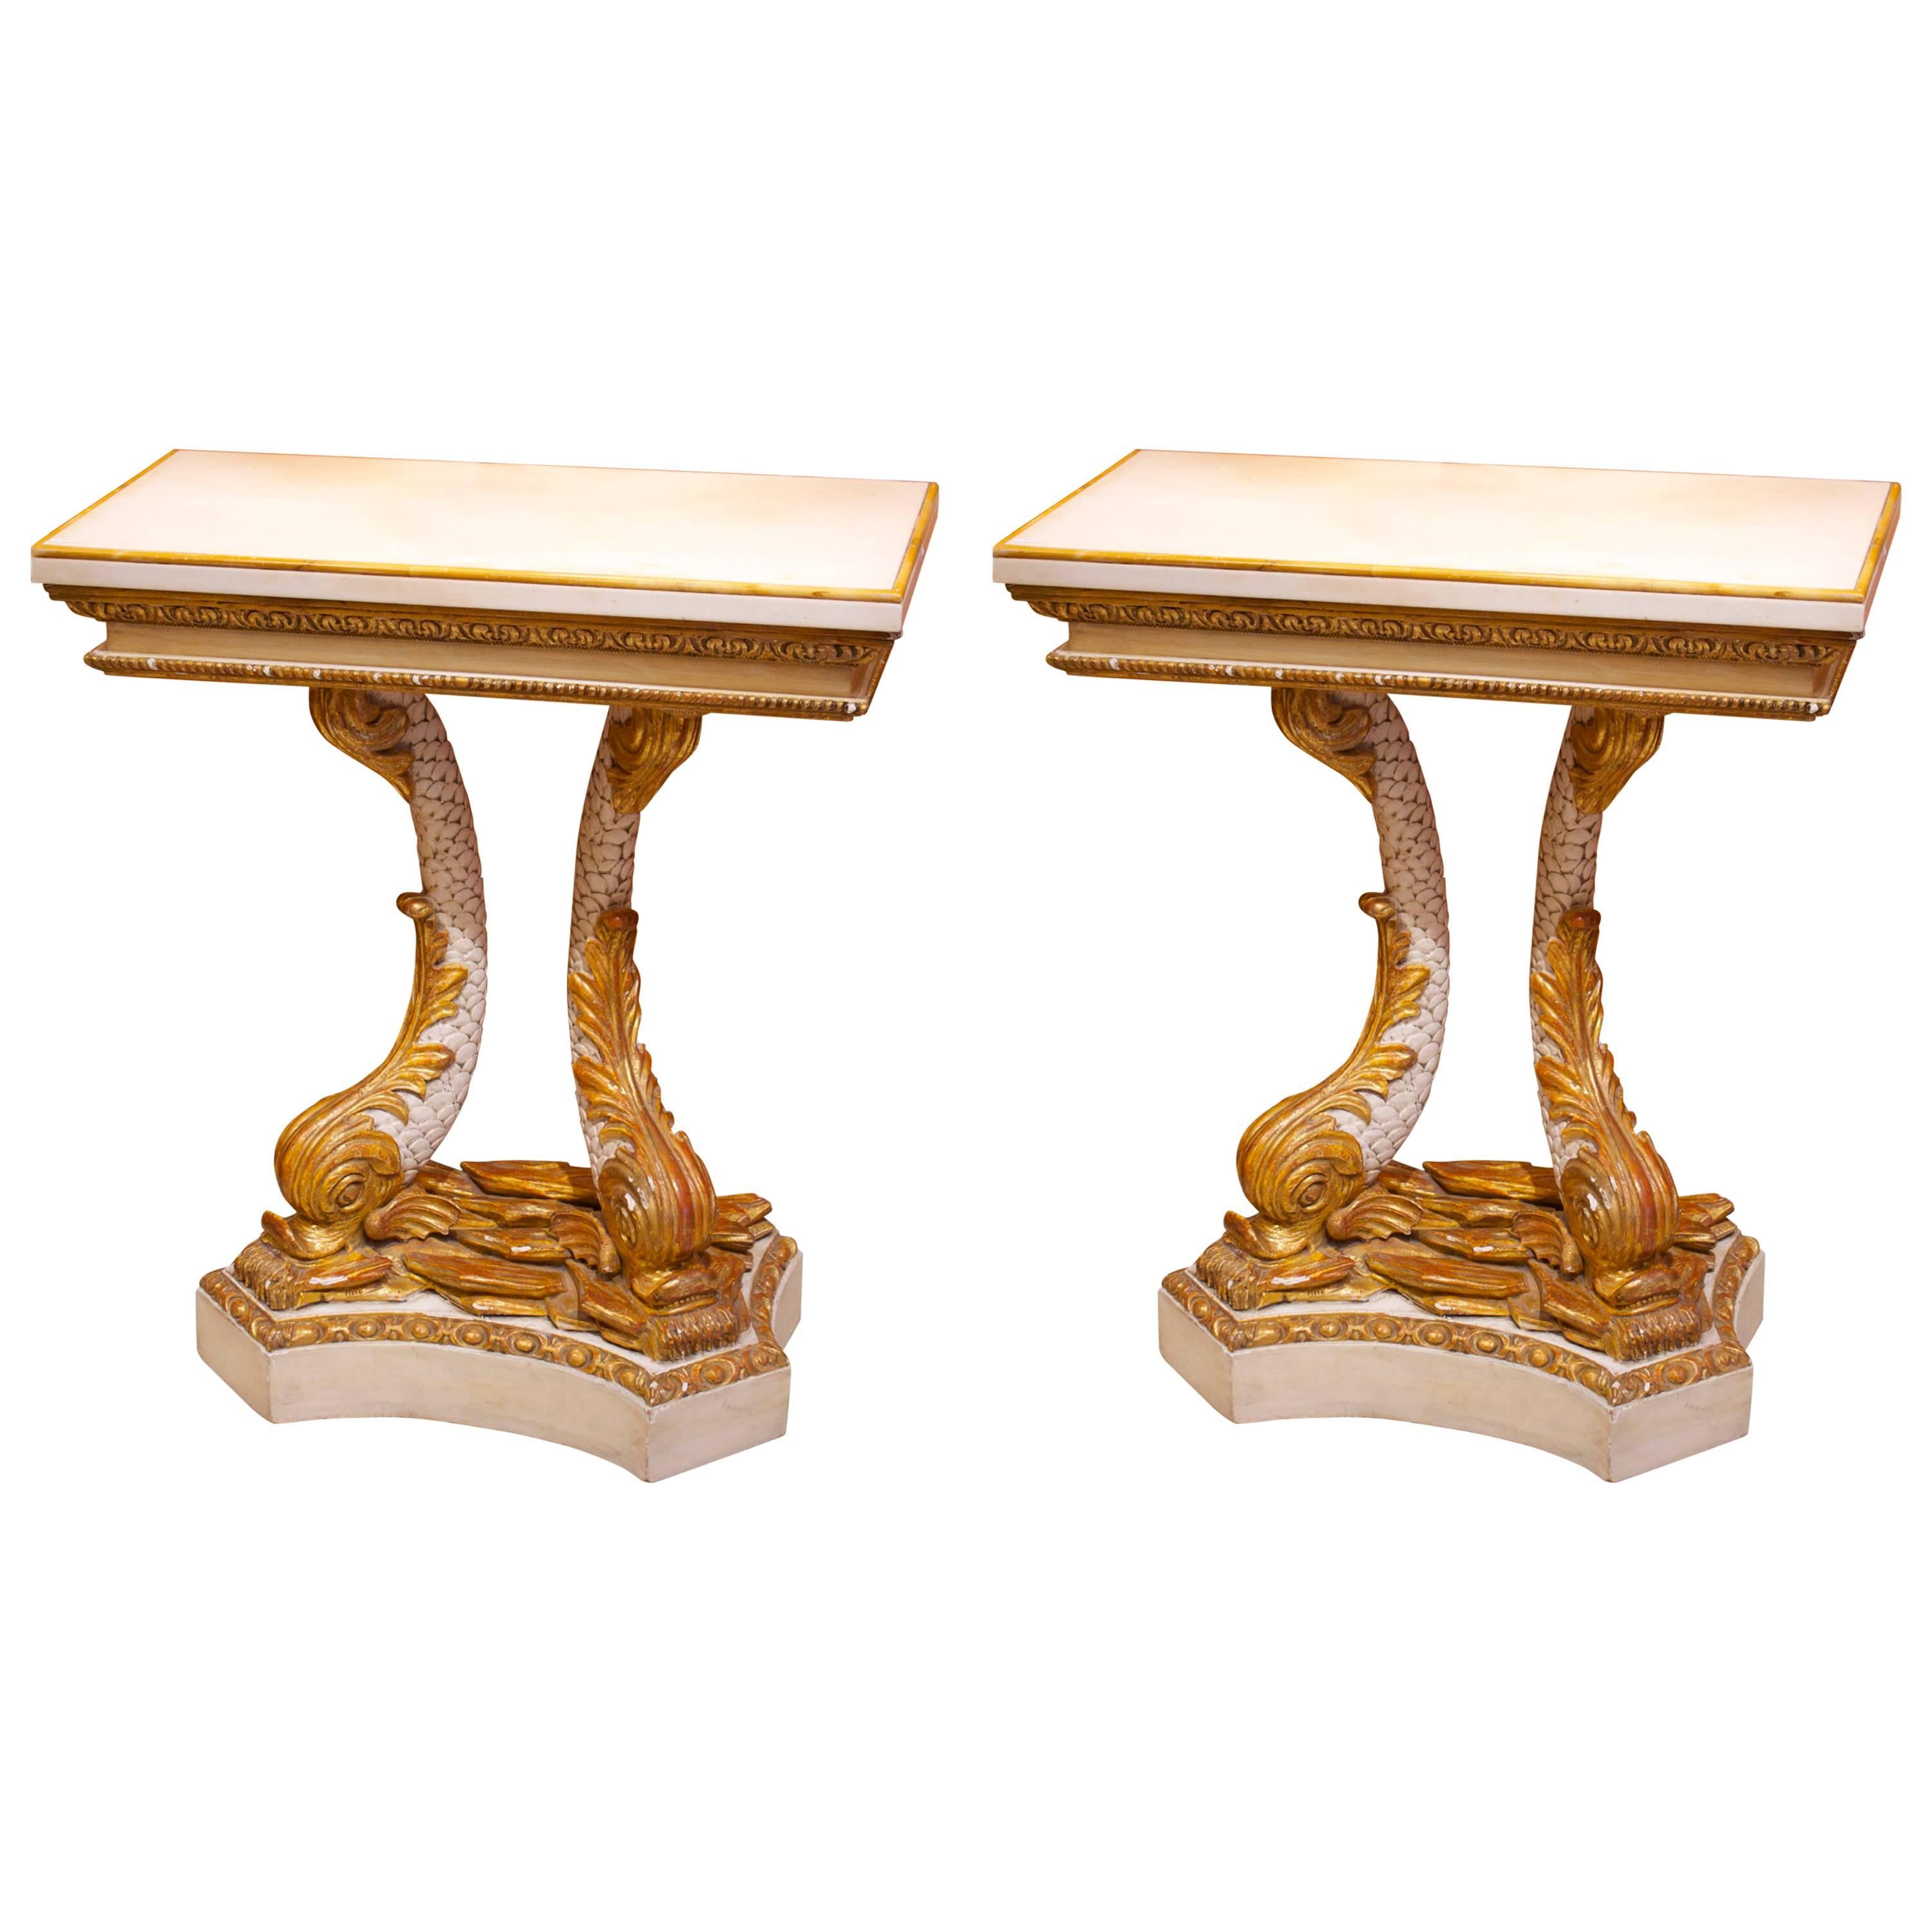 Pair of Lacquered Gilded Dolphin Consoles Tables White Marble Top, 19th Century